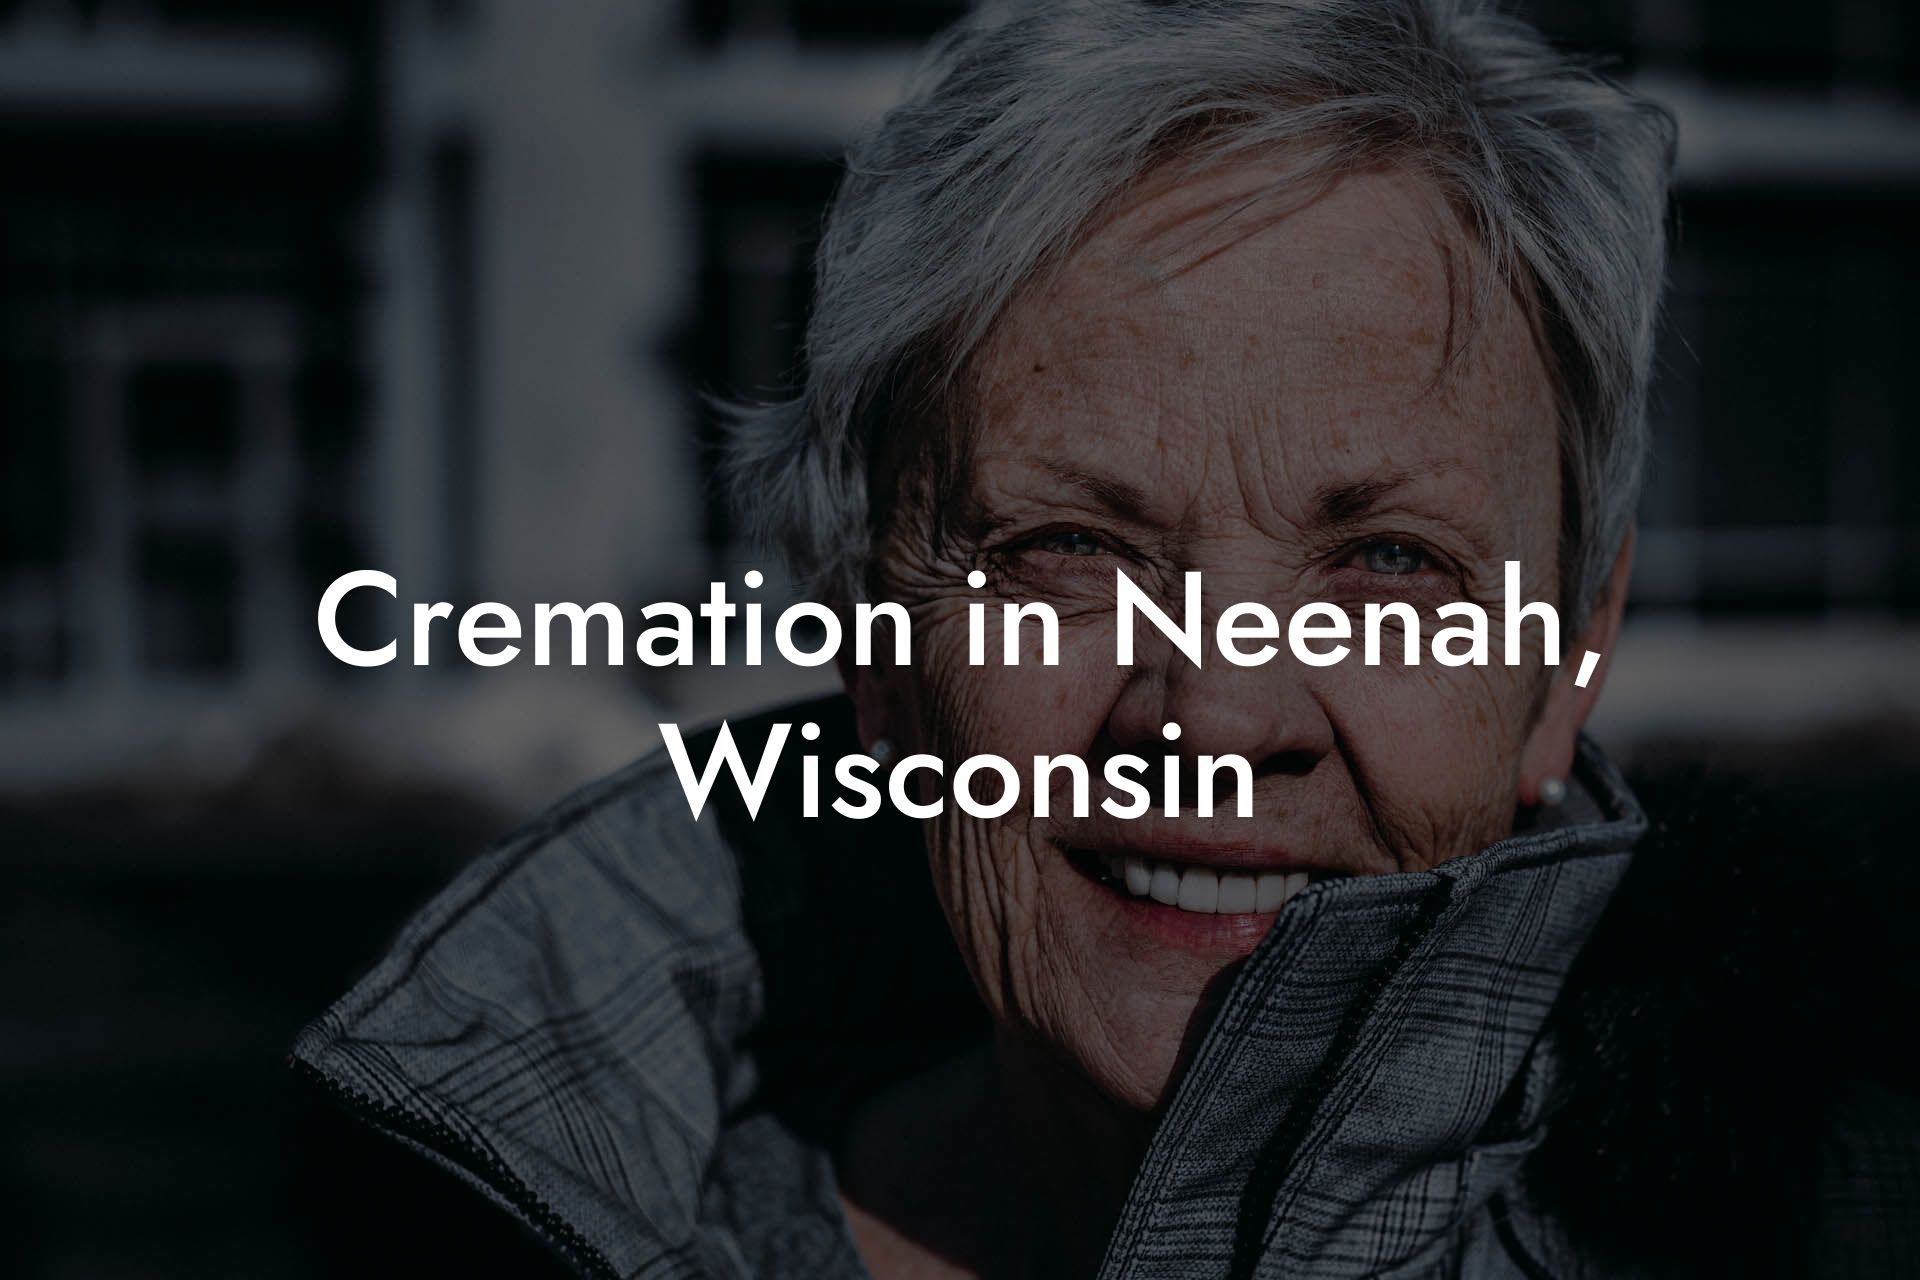 Cremation in Neenah, Wisconsin